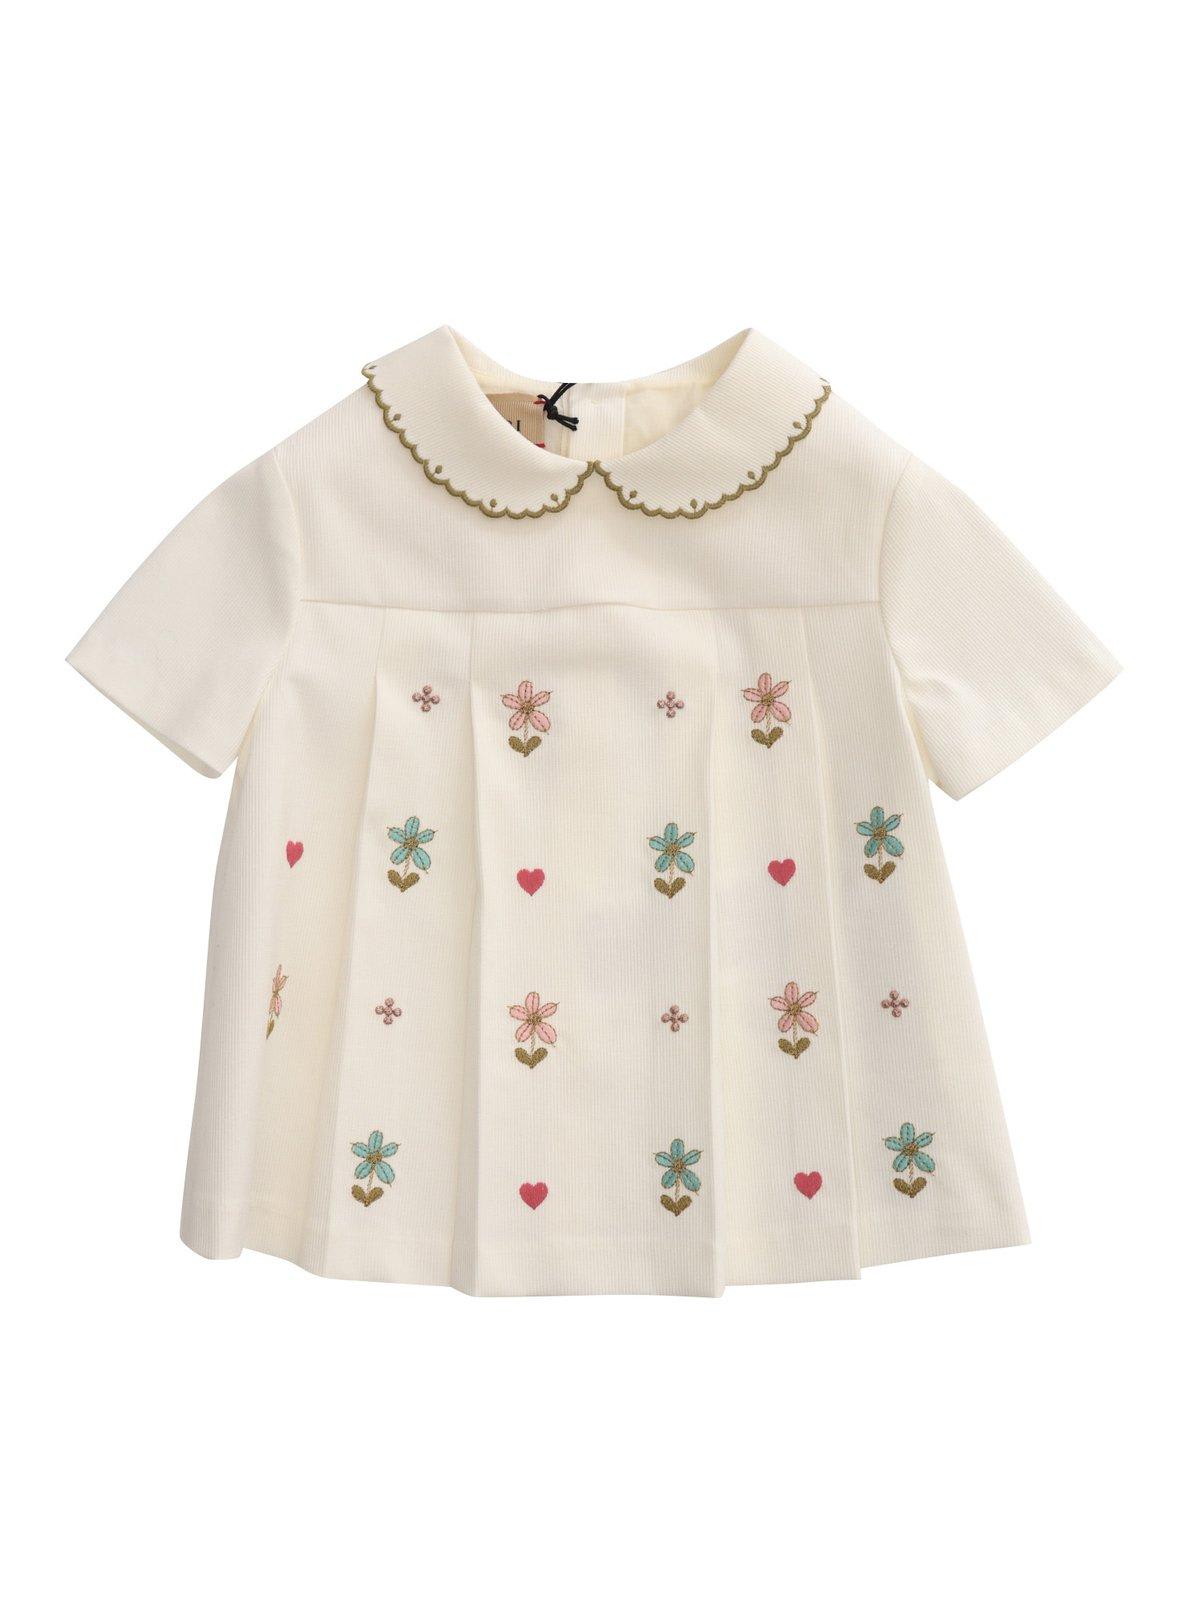 Gucci Babies' Floral Printed Short Sleeved Blouse